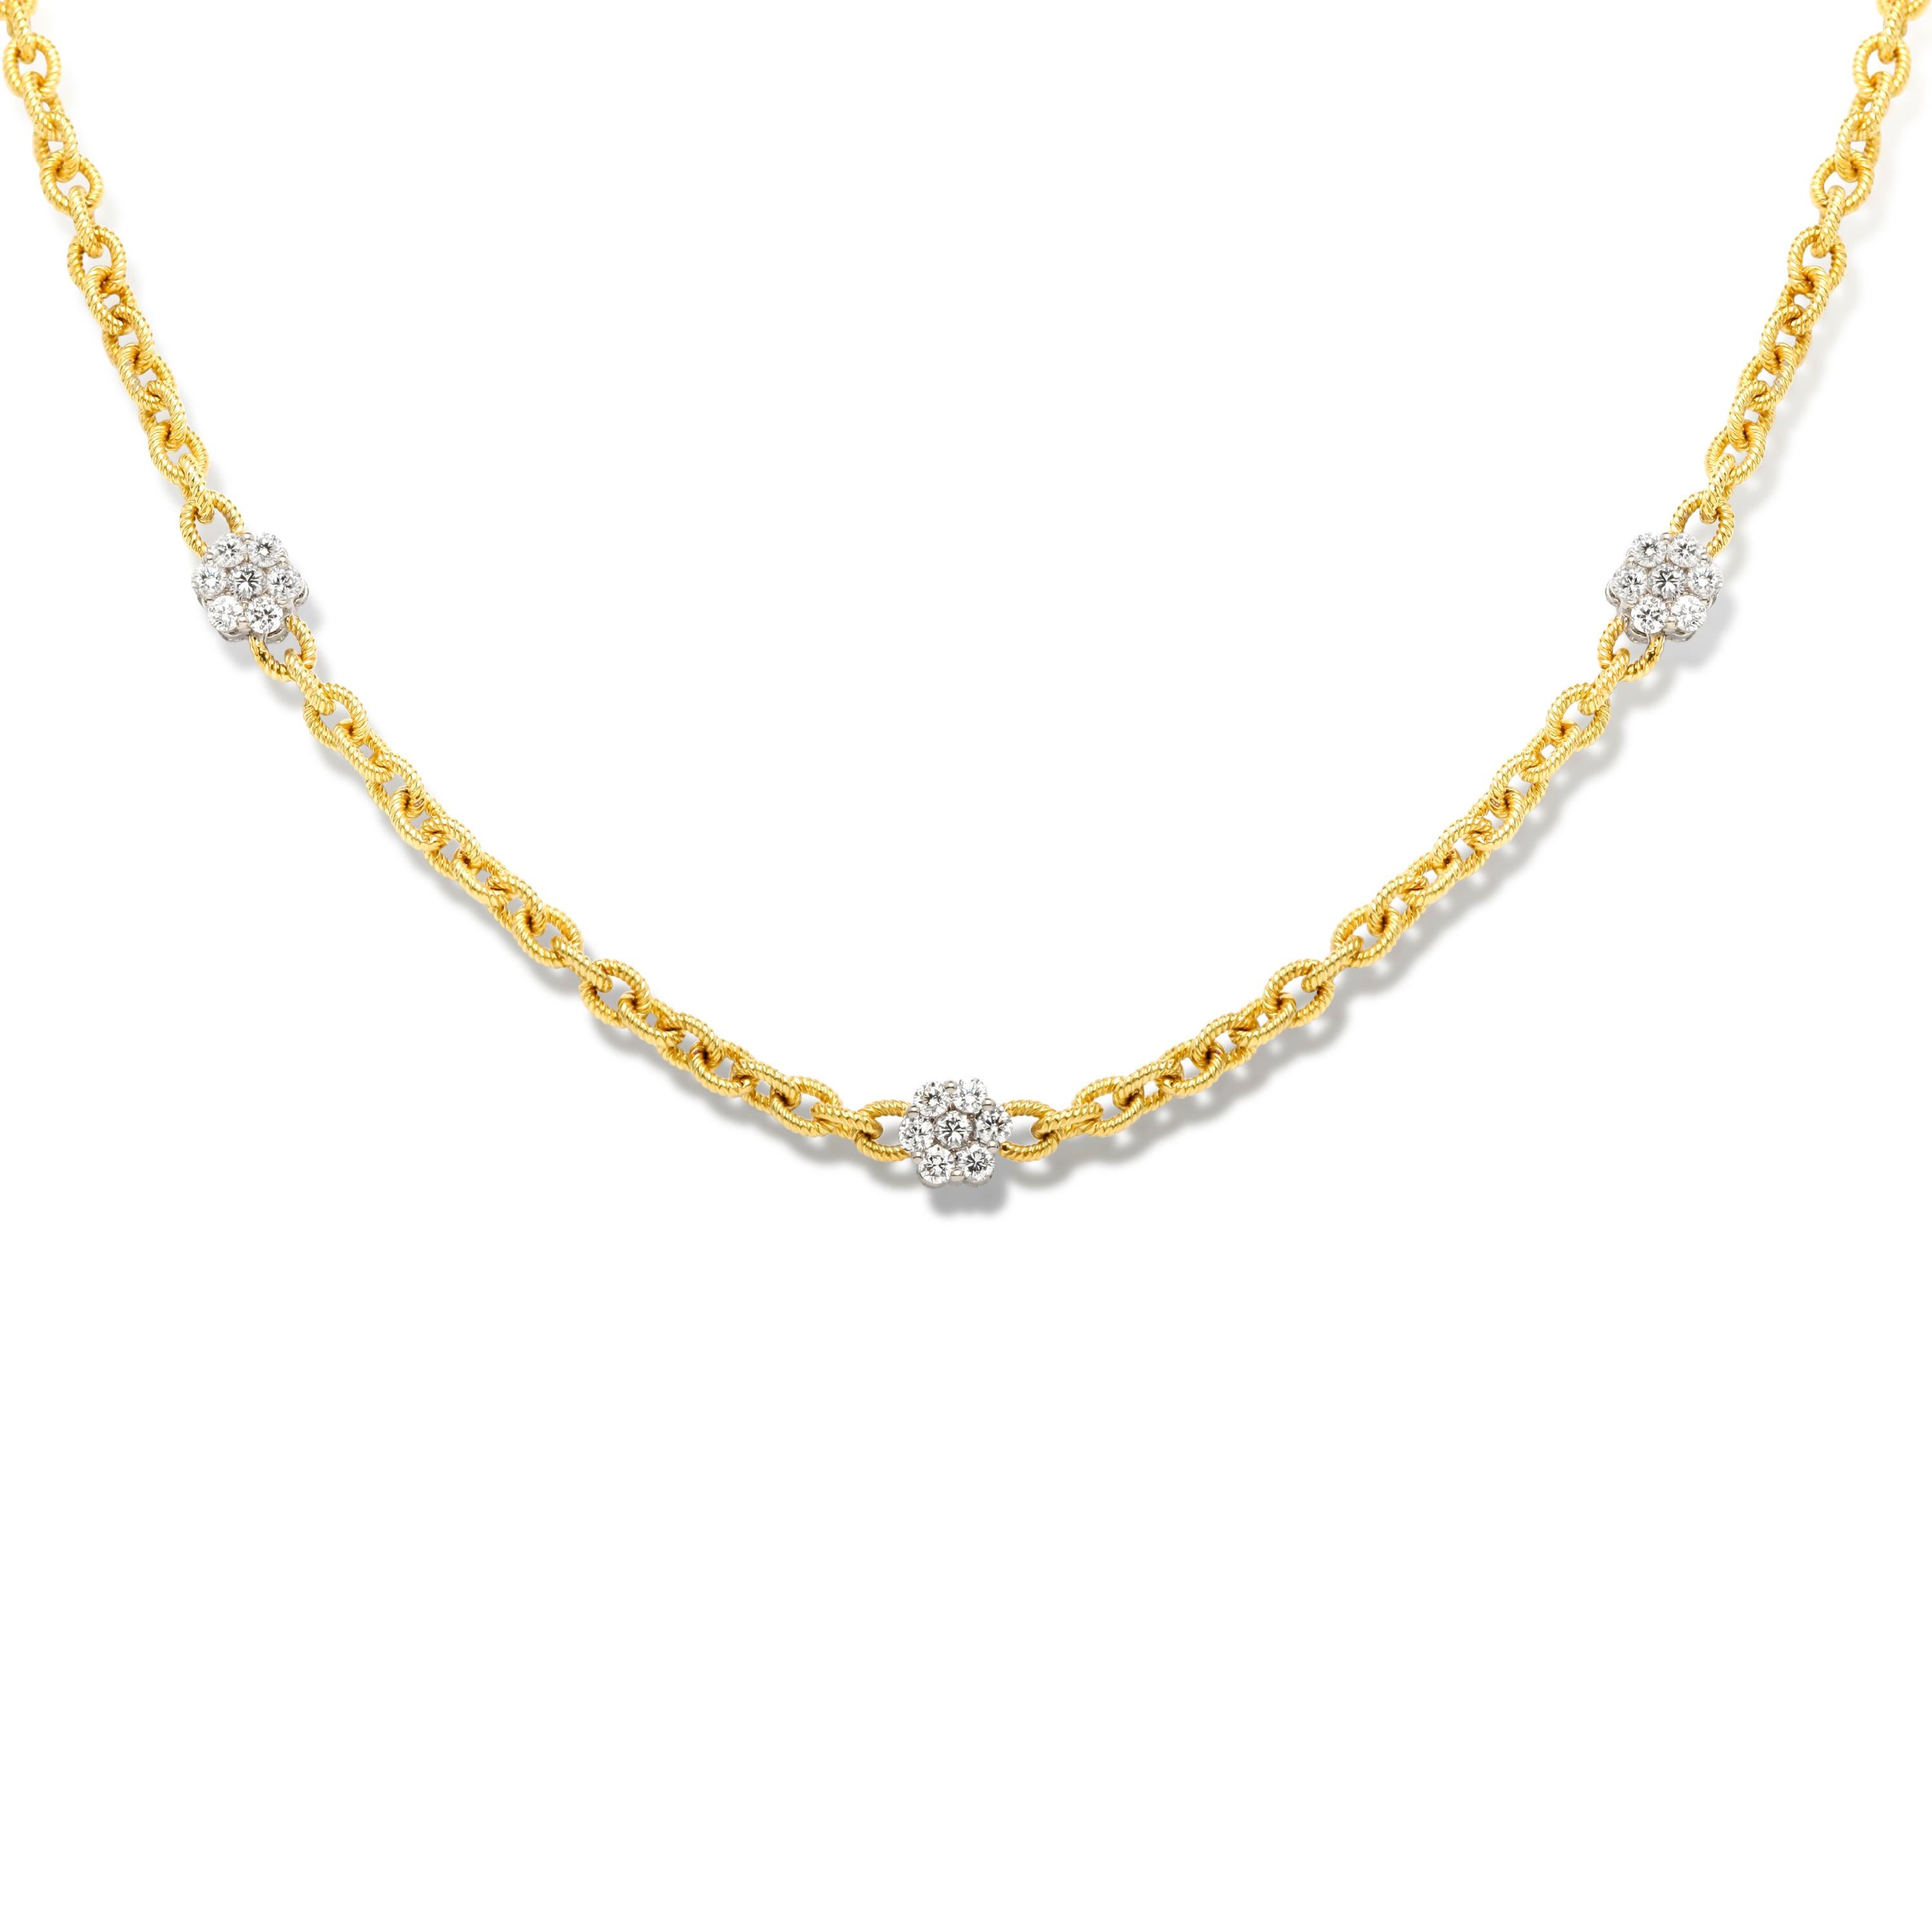 Stambolian 18K Gold Double Sided Diamond Cluster Handmade Long Chain Necklace

This gorgeous piece features a handmade chain in solid 18k gold with nine, double-sided, diamond clusters.

Apprx. 5.02 carat G color, VS clarity diamonds total